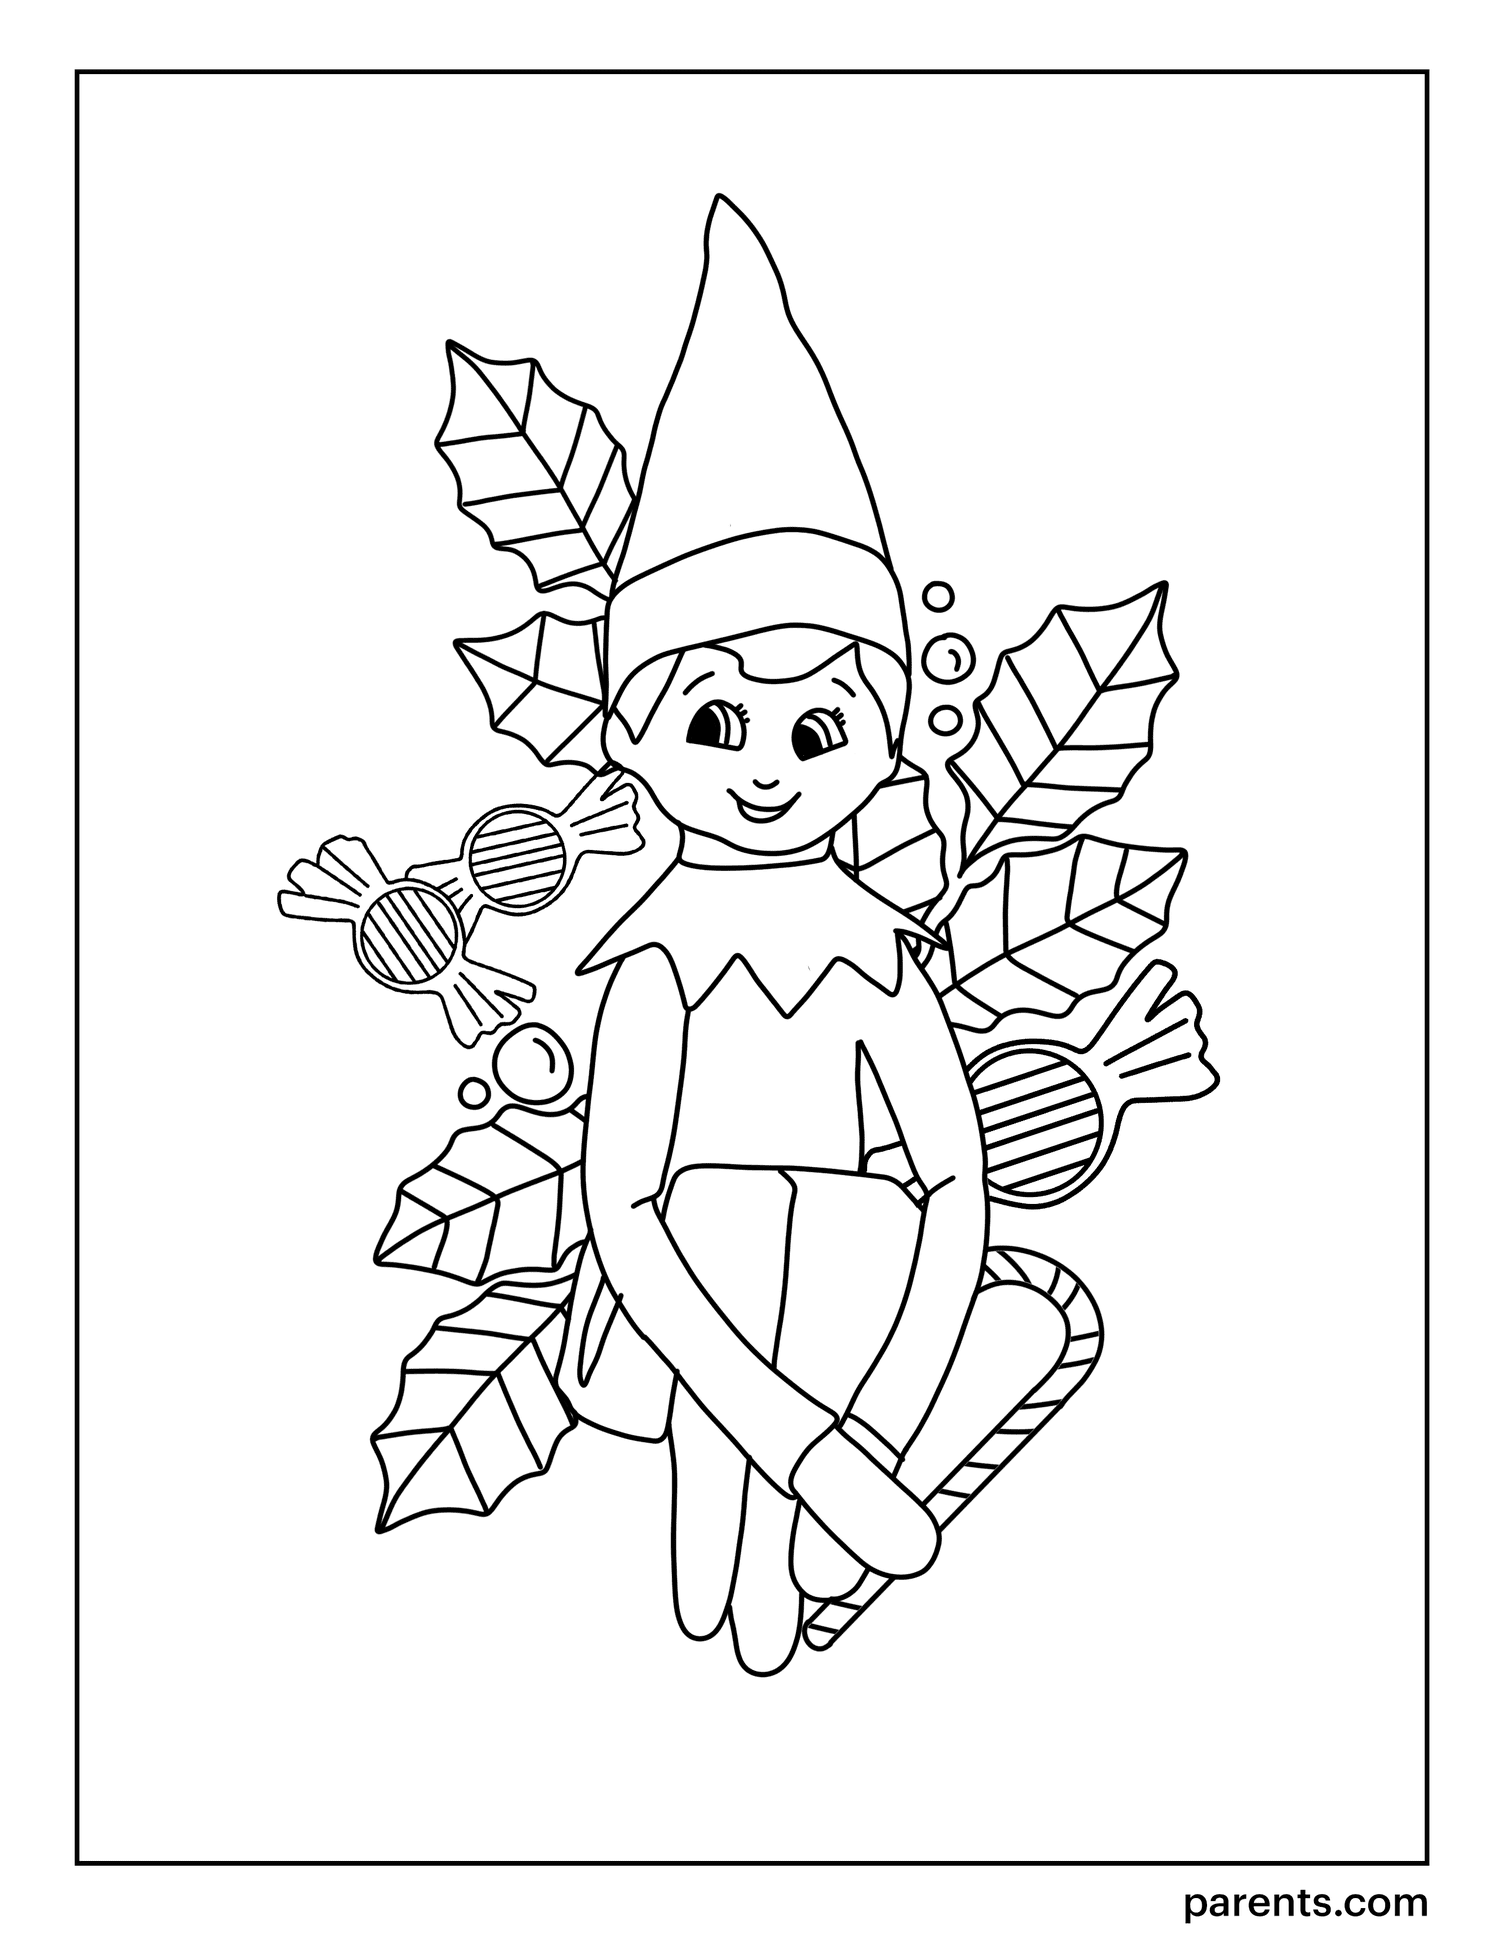  Download 36 Elves Christmas Girl Elf On The Shelf Coloring Pages